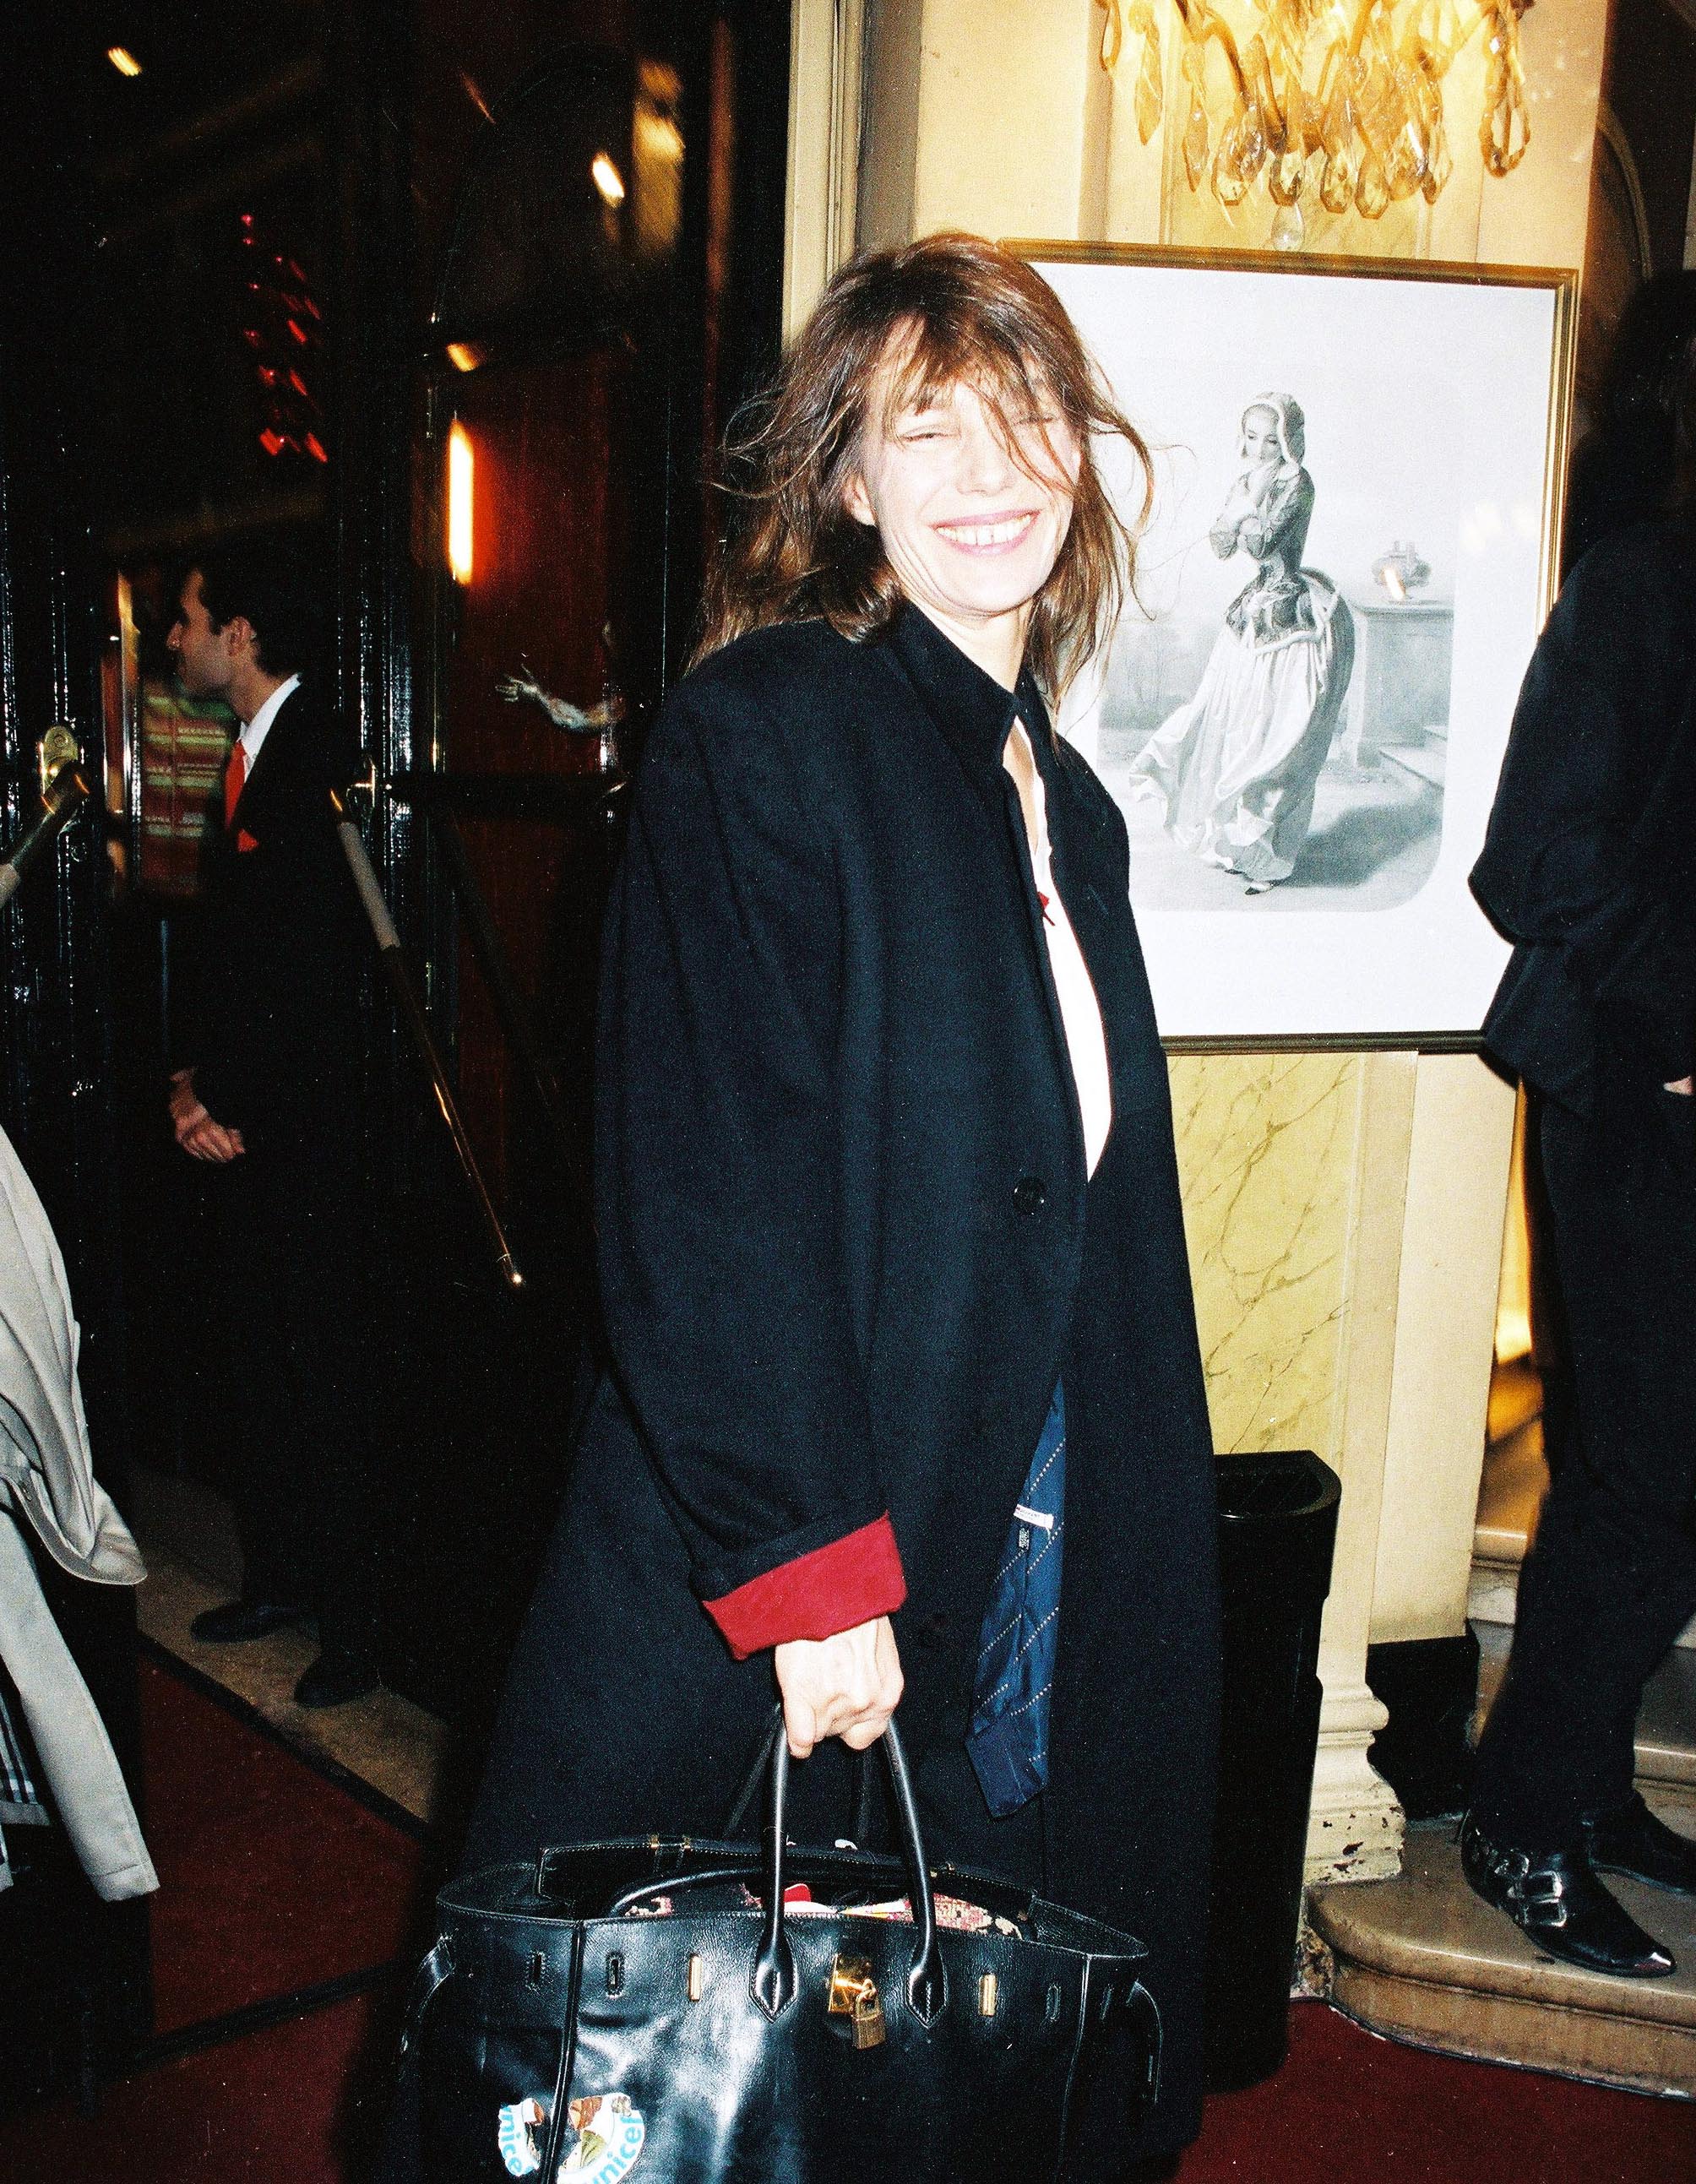 The Birkin Bag Is Jane Birkin's Style Legacy—This Is How to Buy